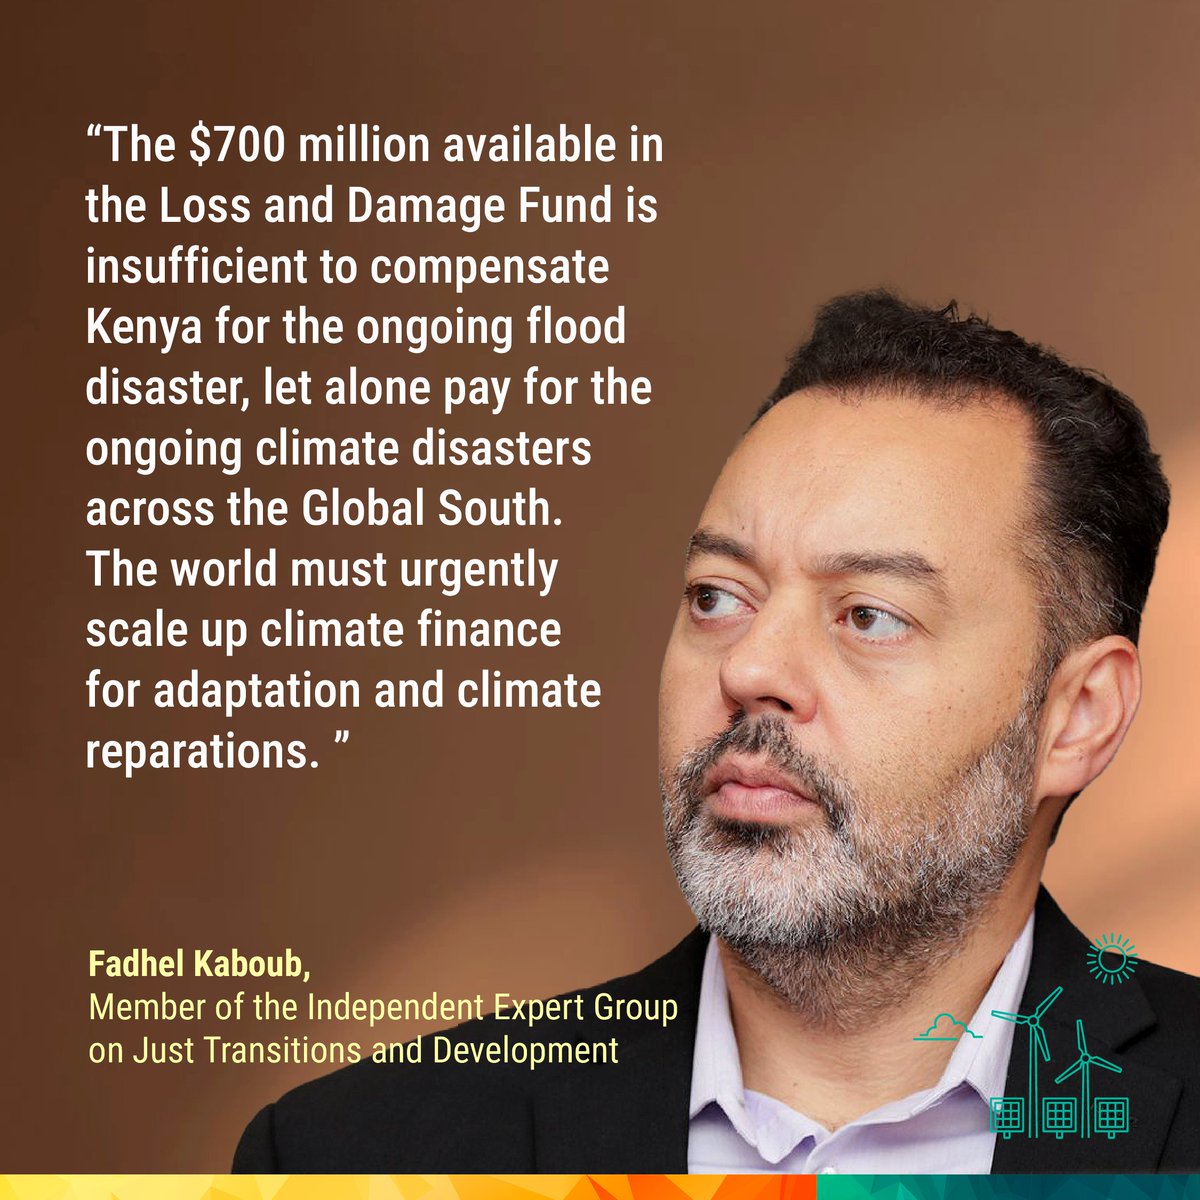 Fadhel Kaboub, member of the Independent Expert Group on Just Transitions and Development

'The $700 million available in the #LossandDamage Fund is insufficient to compensate Kenya for the ongoing #flood disaster alone, let alone pay for the ongoing #climate disasters across the…